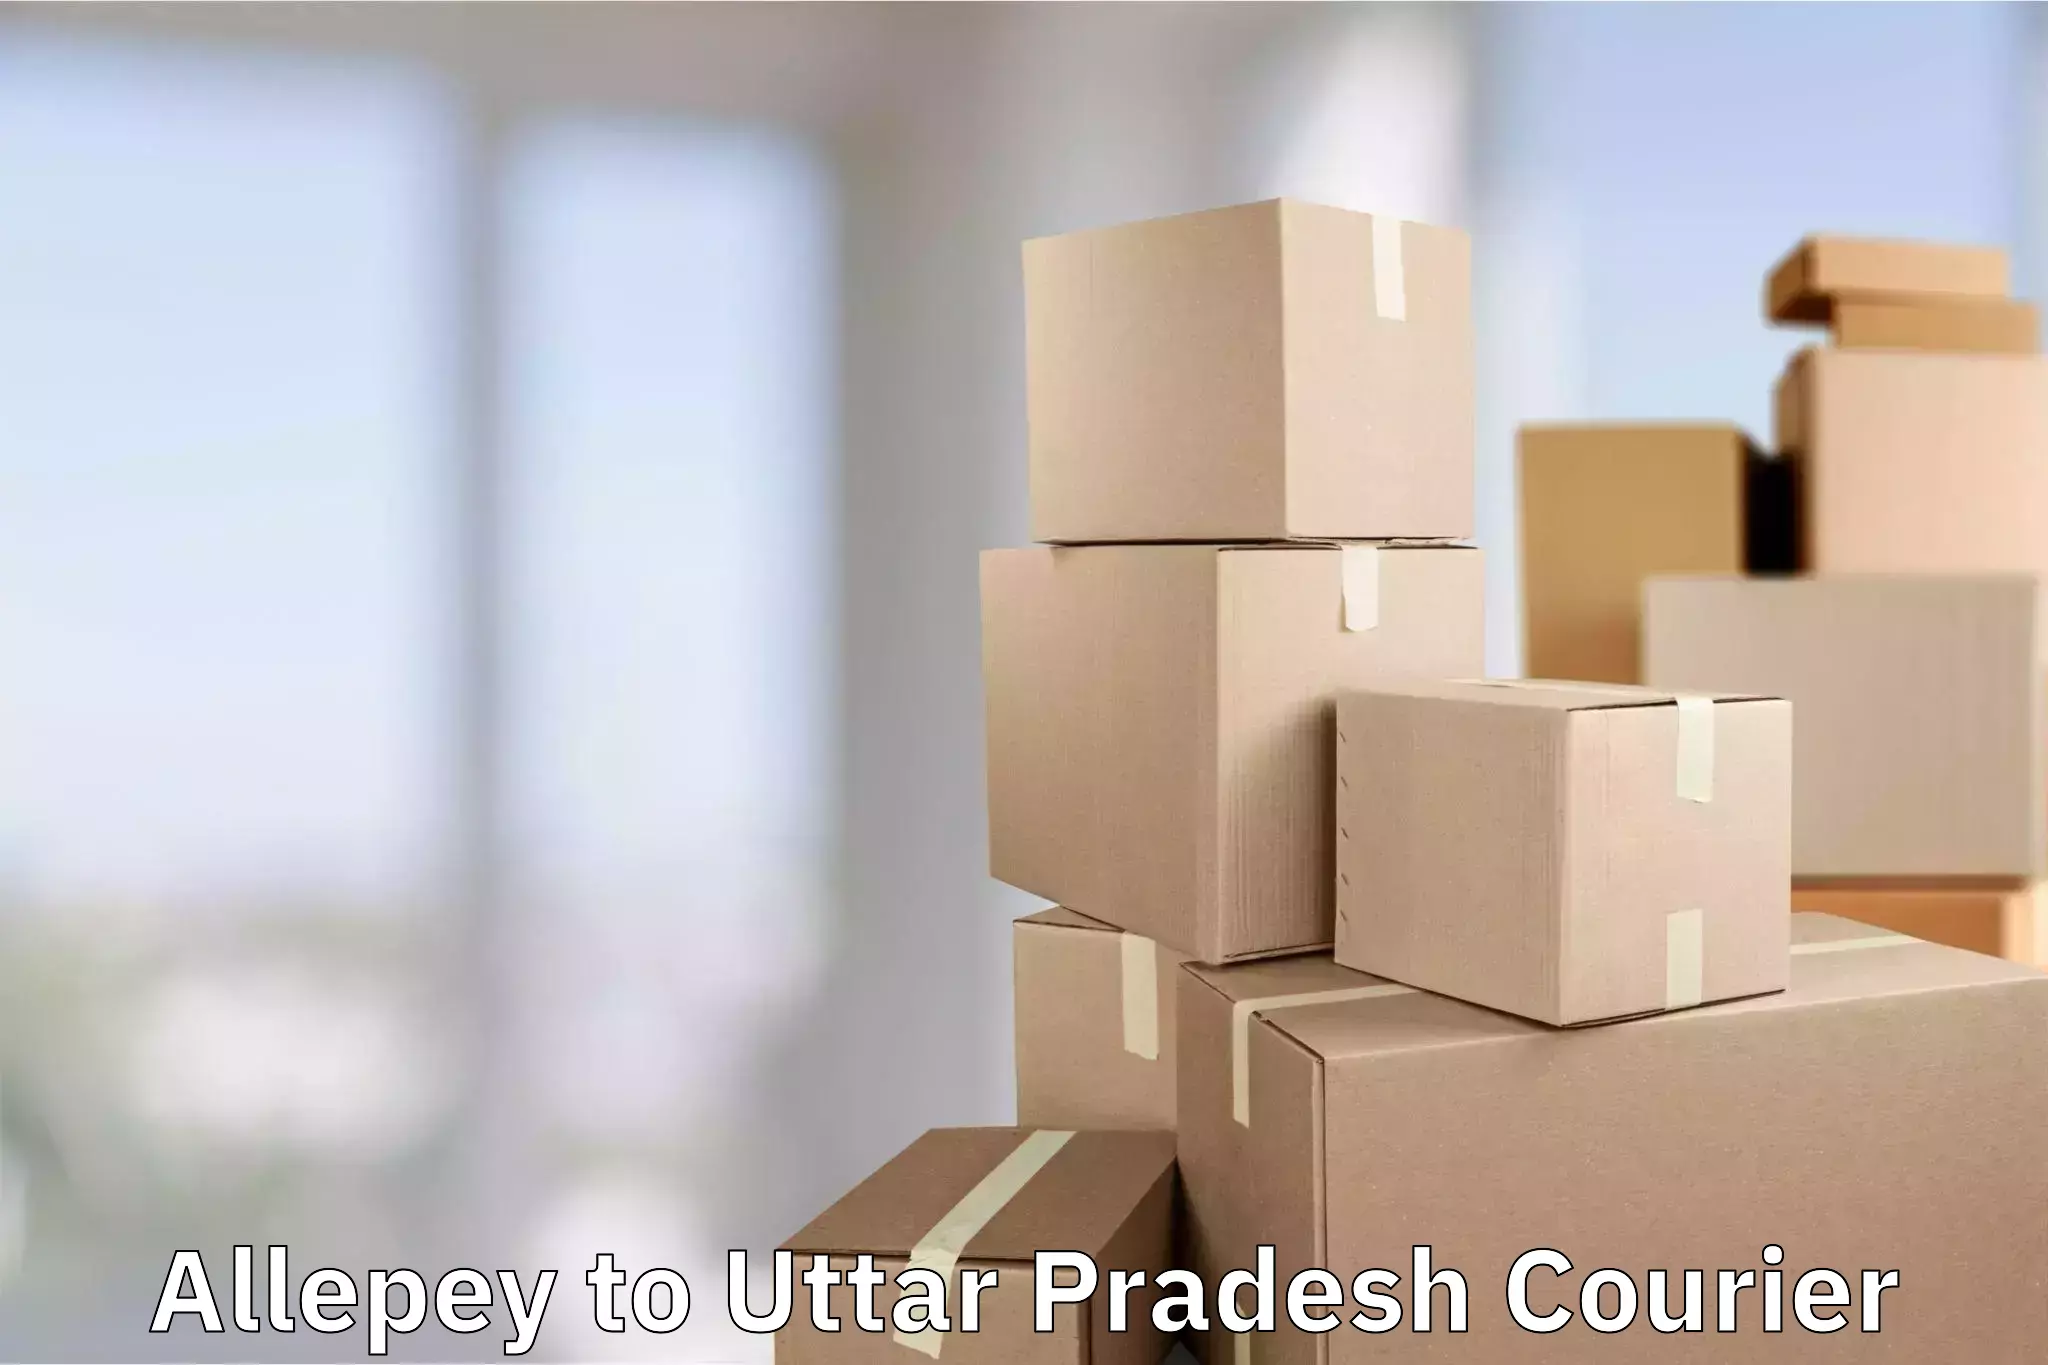 Online luggage shipping in Allepey to Agra